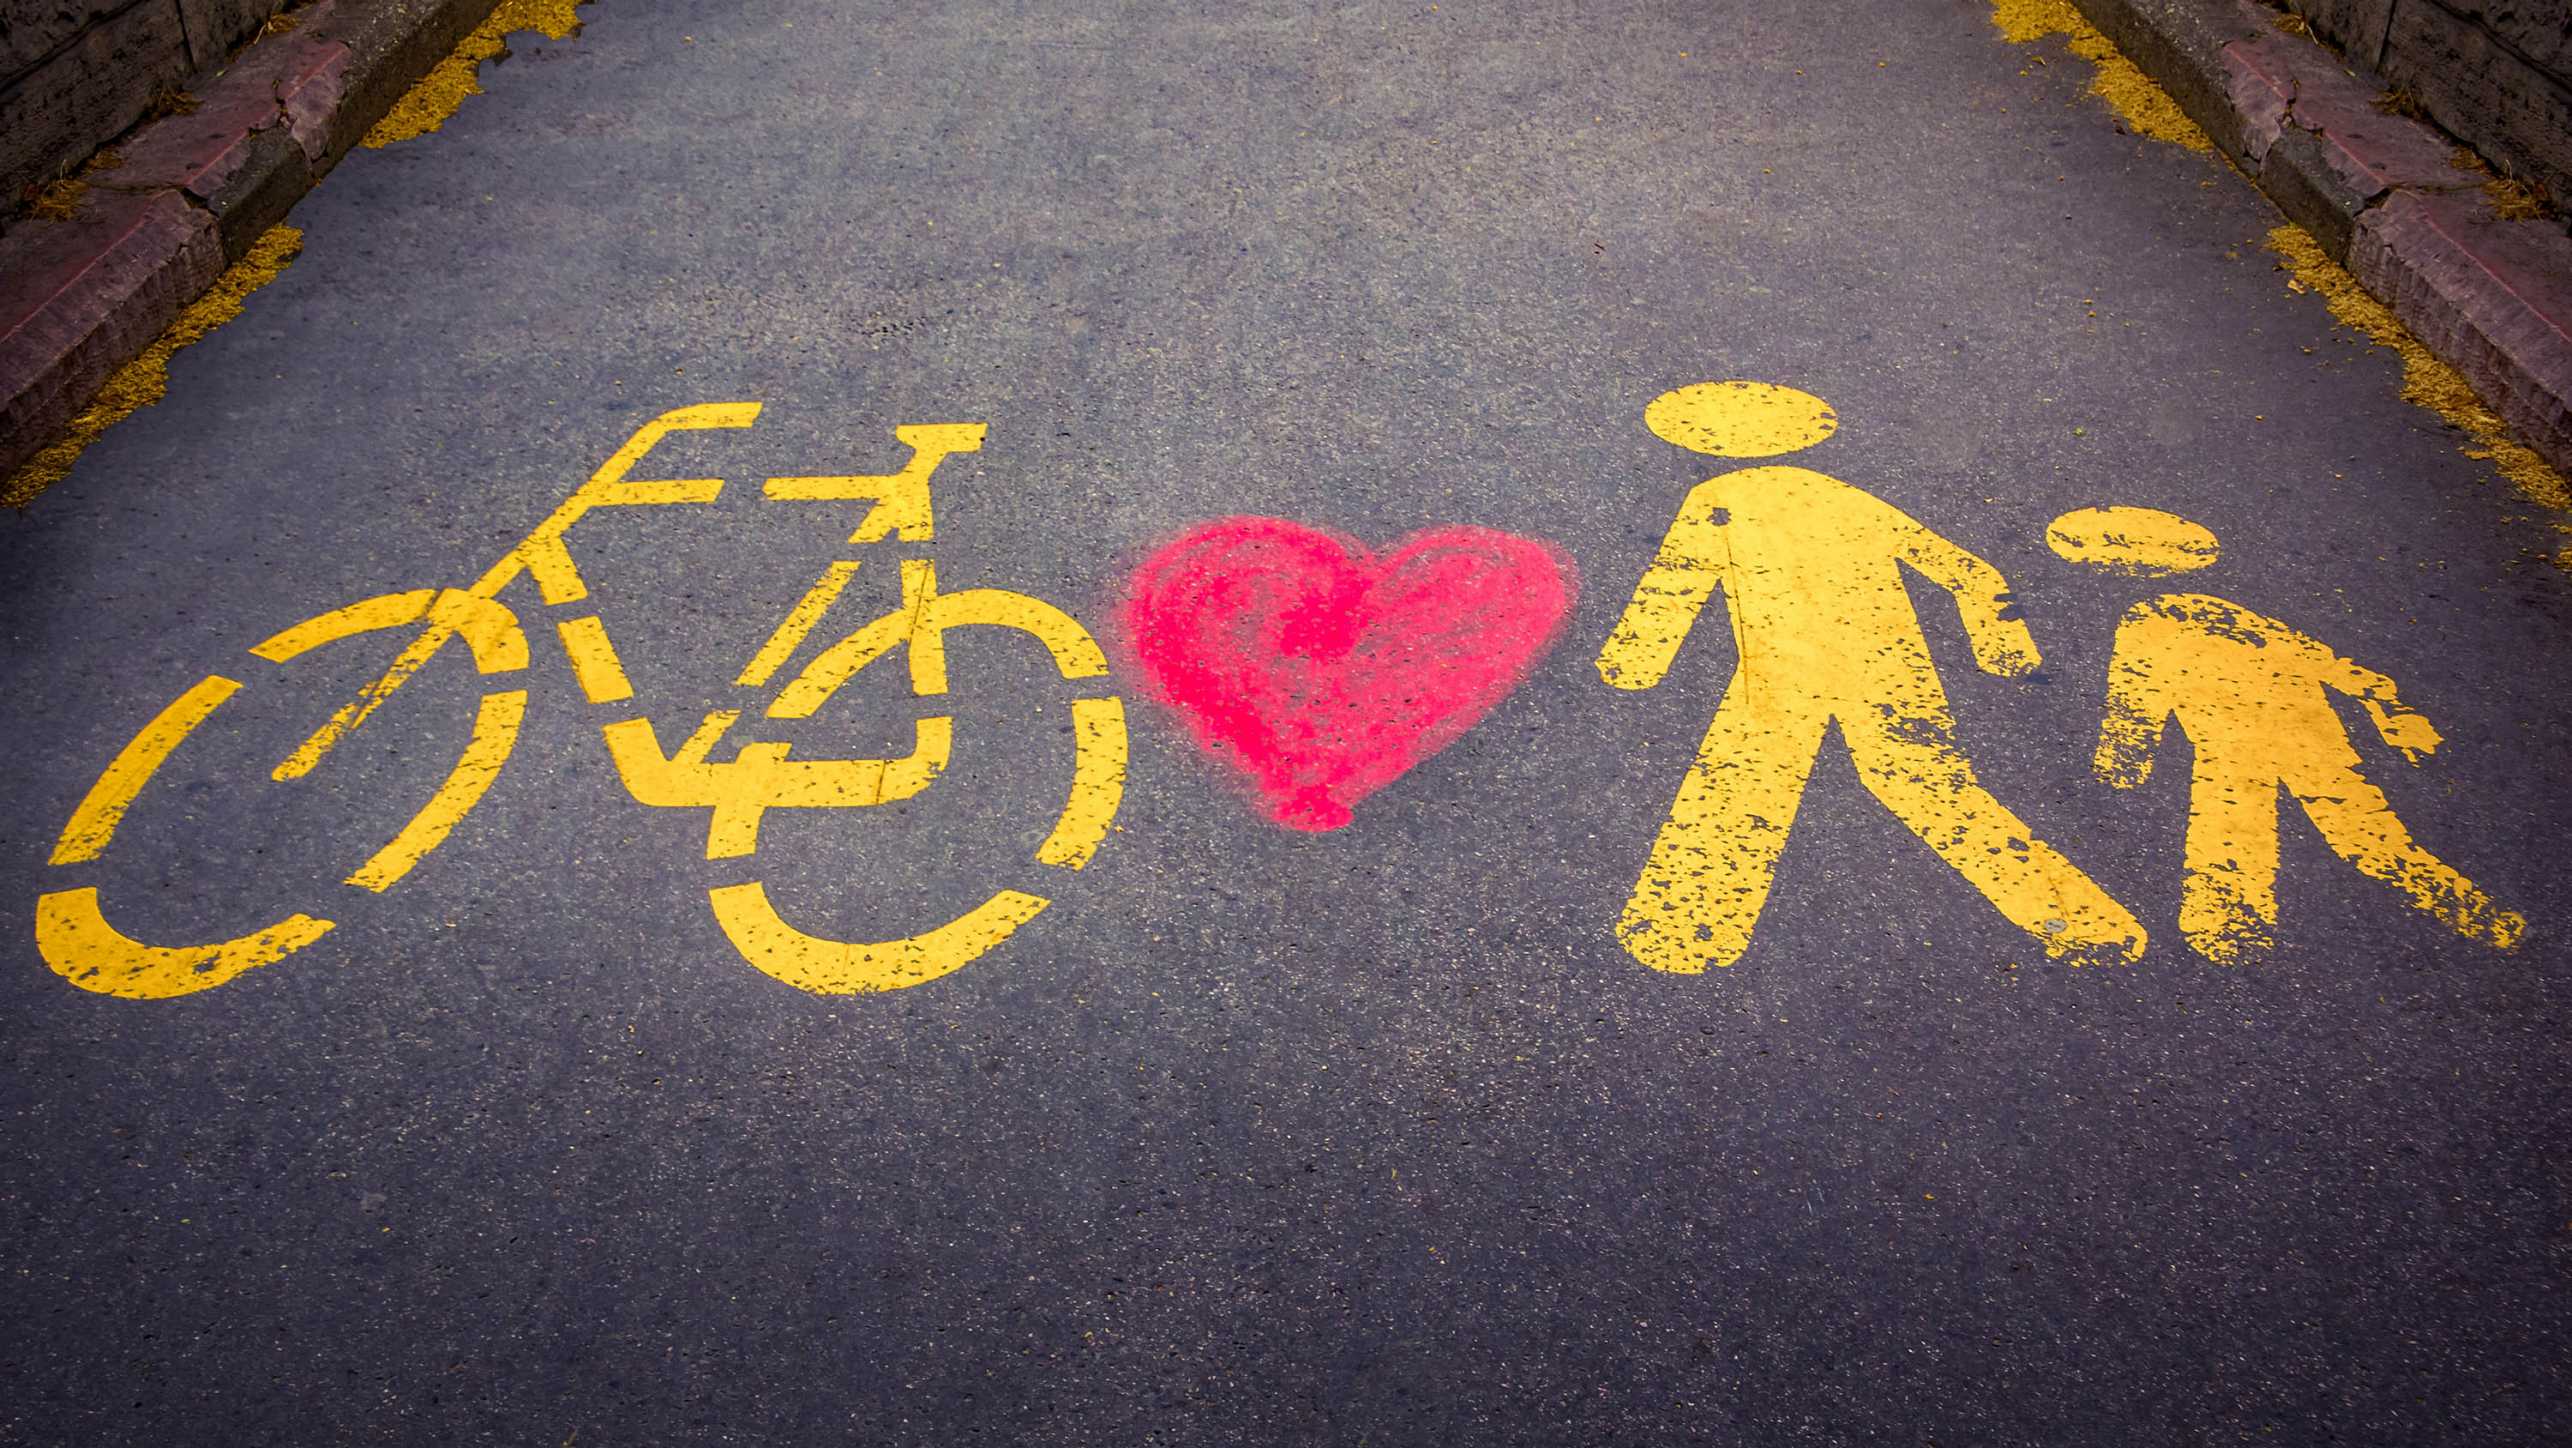 On a paved path, the pictograms of a bicycle and two people are spray-painted in yellow with a red heart between the bicycle and the people.